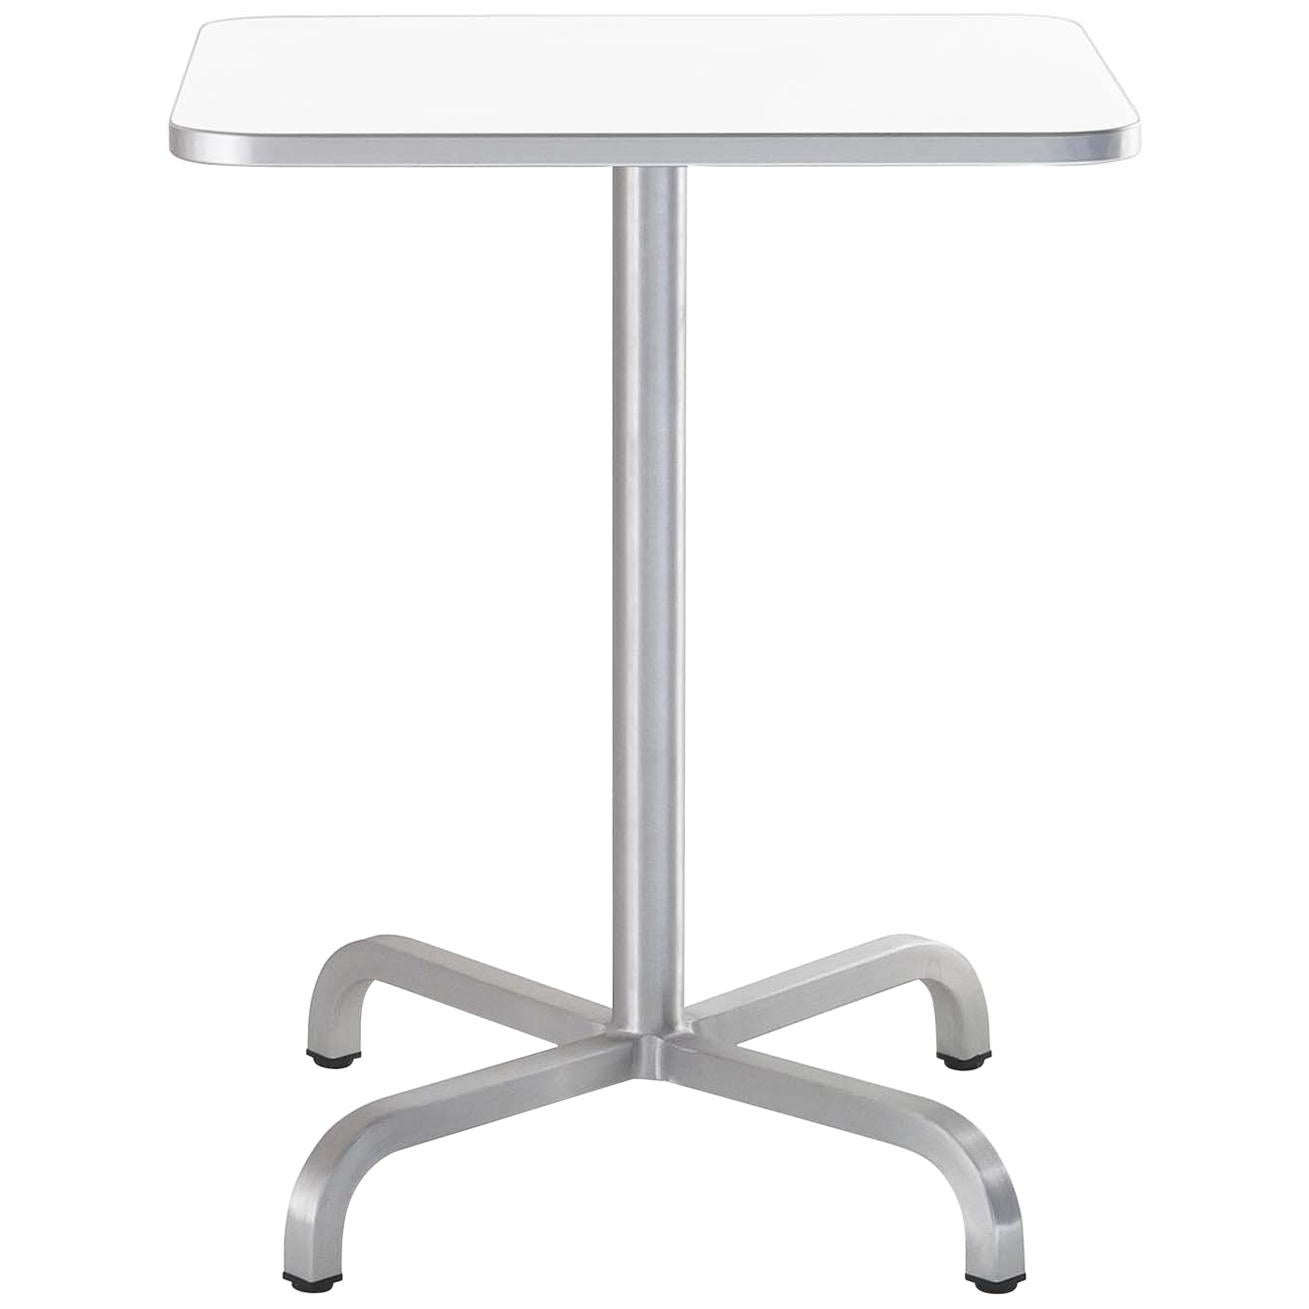 Emeco 20-06 Small Square Café Table with White Laminate Top by Norman Foster